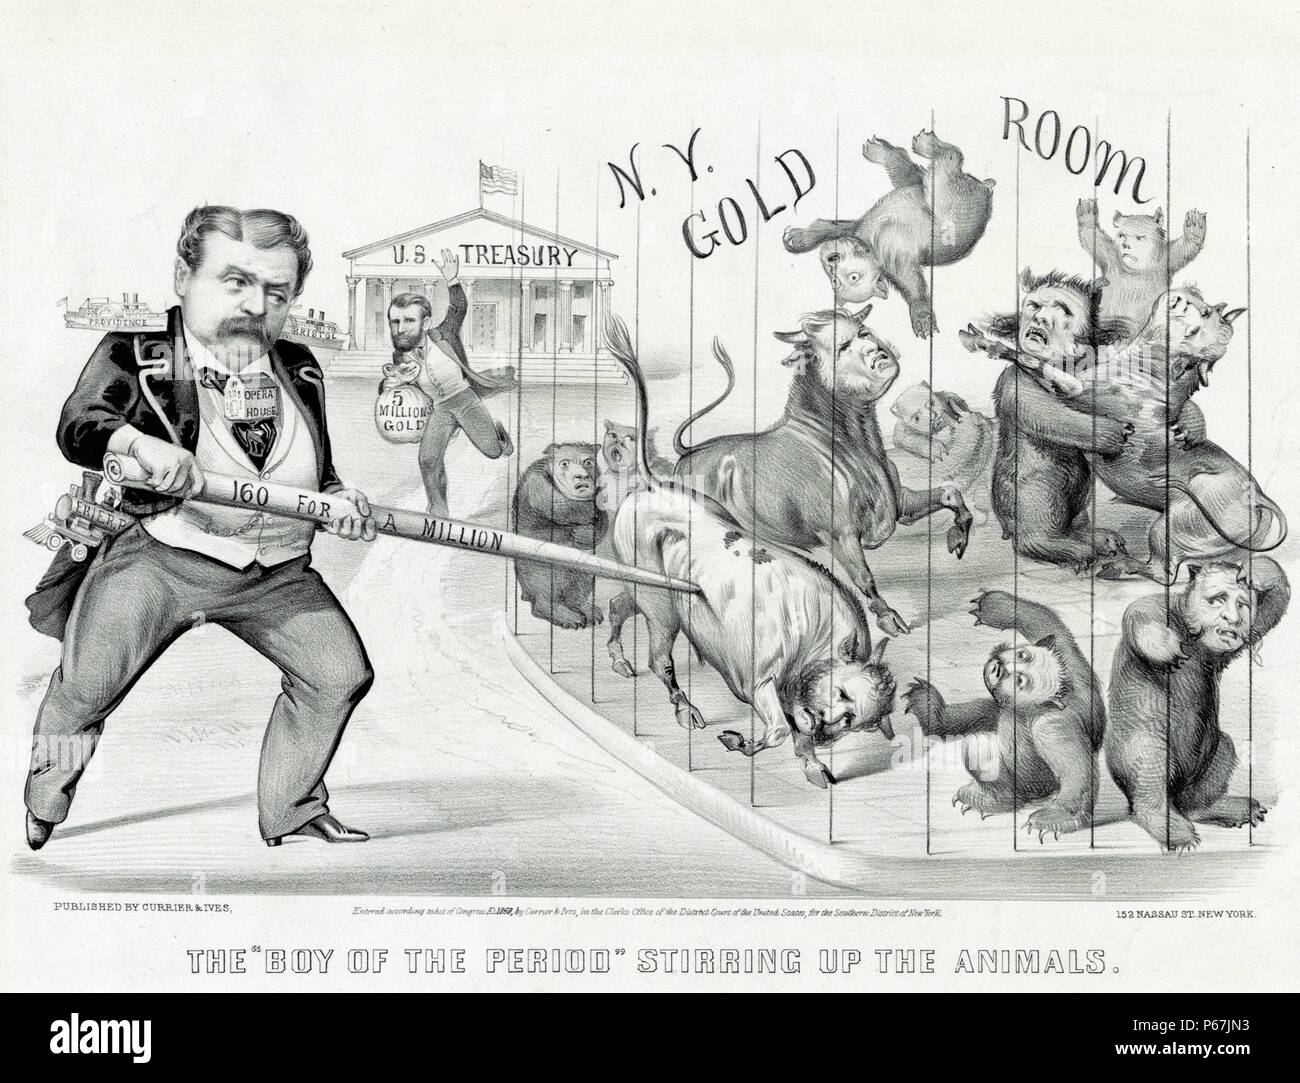 The 'Boy of the period' stirring up the animals' Caricature of financier Jay Gould, left, who attempts to corner the gold market, represented by bulls and bears in a cage. On Black Friday, September 1869, in the midst of scandal, President Ulysses S. Grant, center, restored prevailing gold prices by having the U.S. Treasury sell five million dollars in gold which he brings forward in a bag. Stock Photo